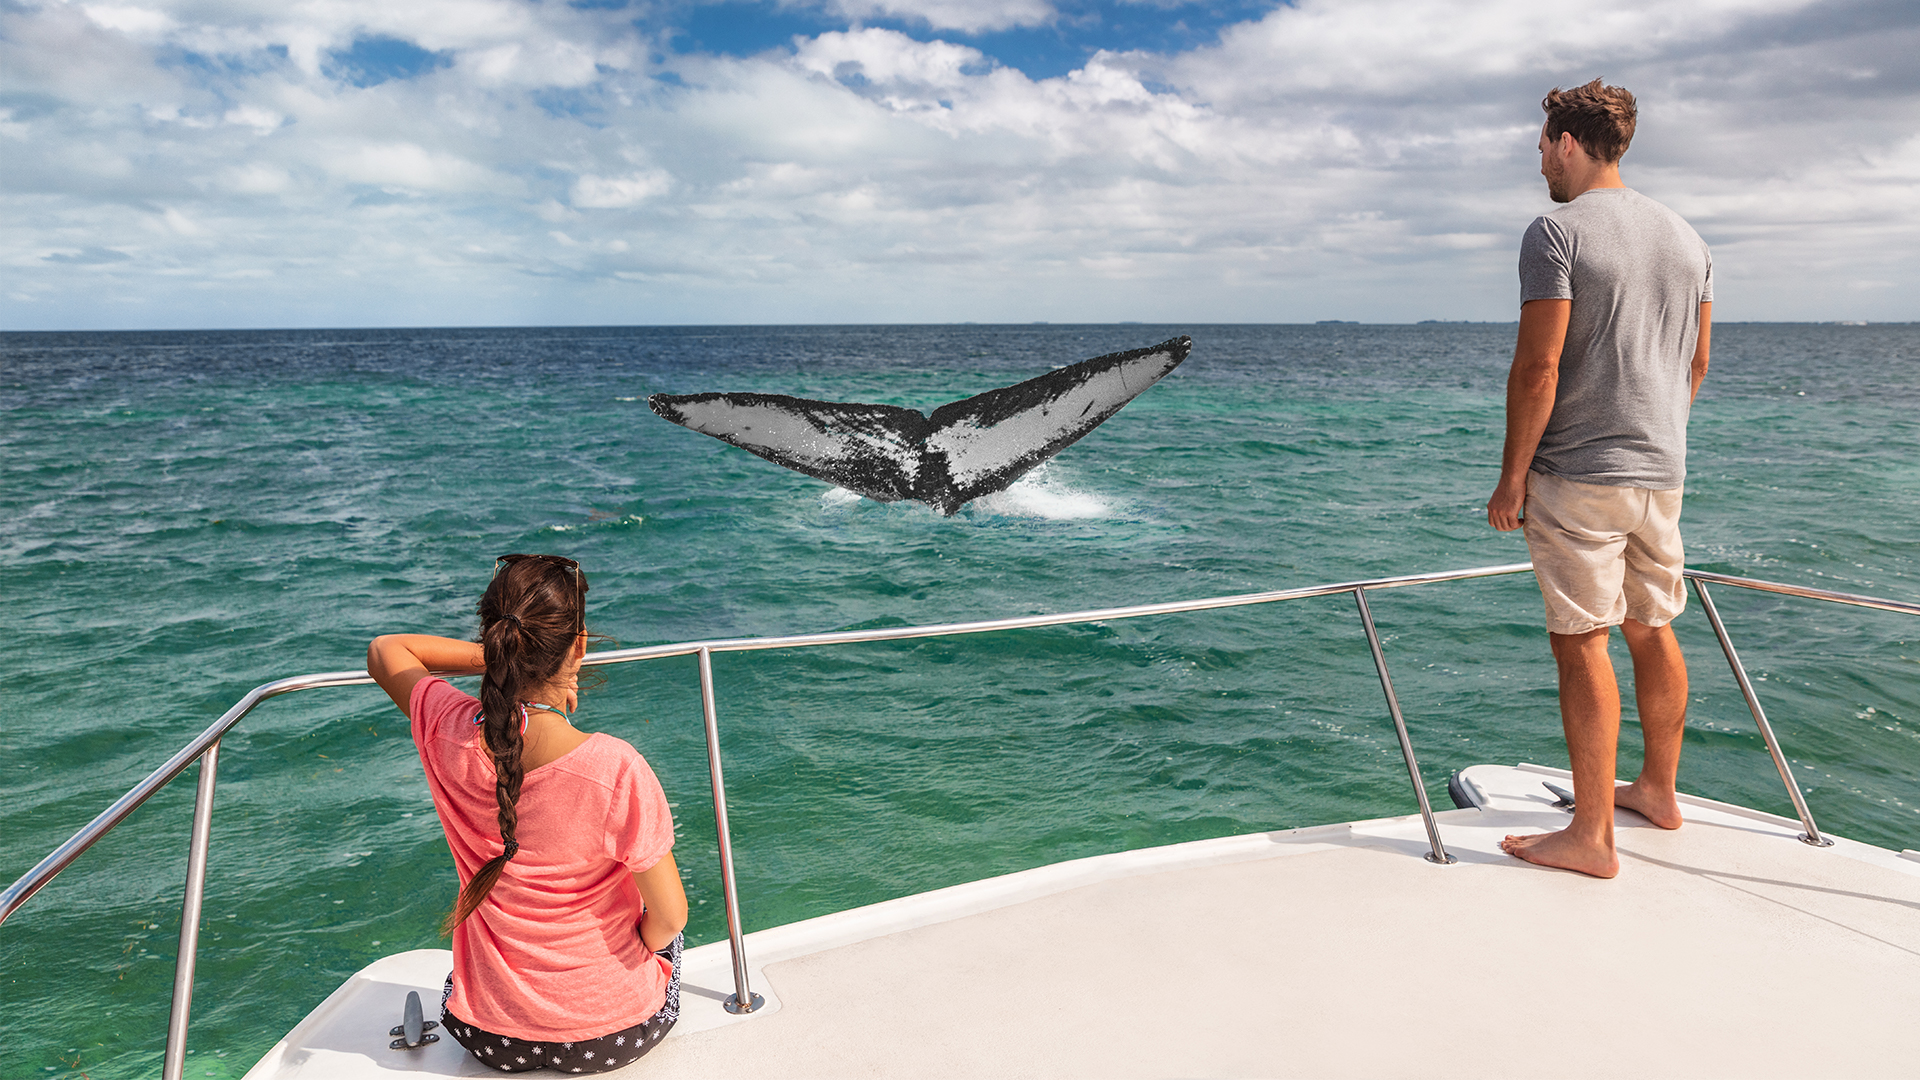 Up close encounters with whales